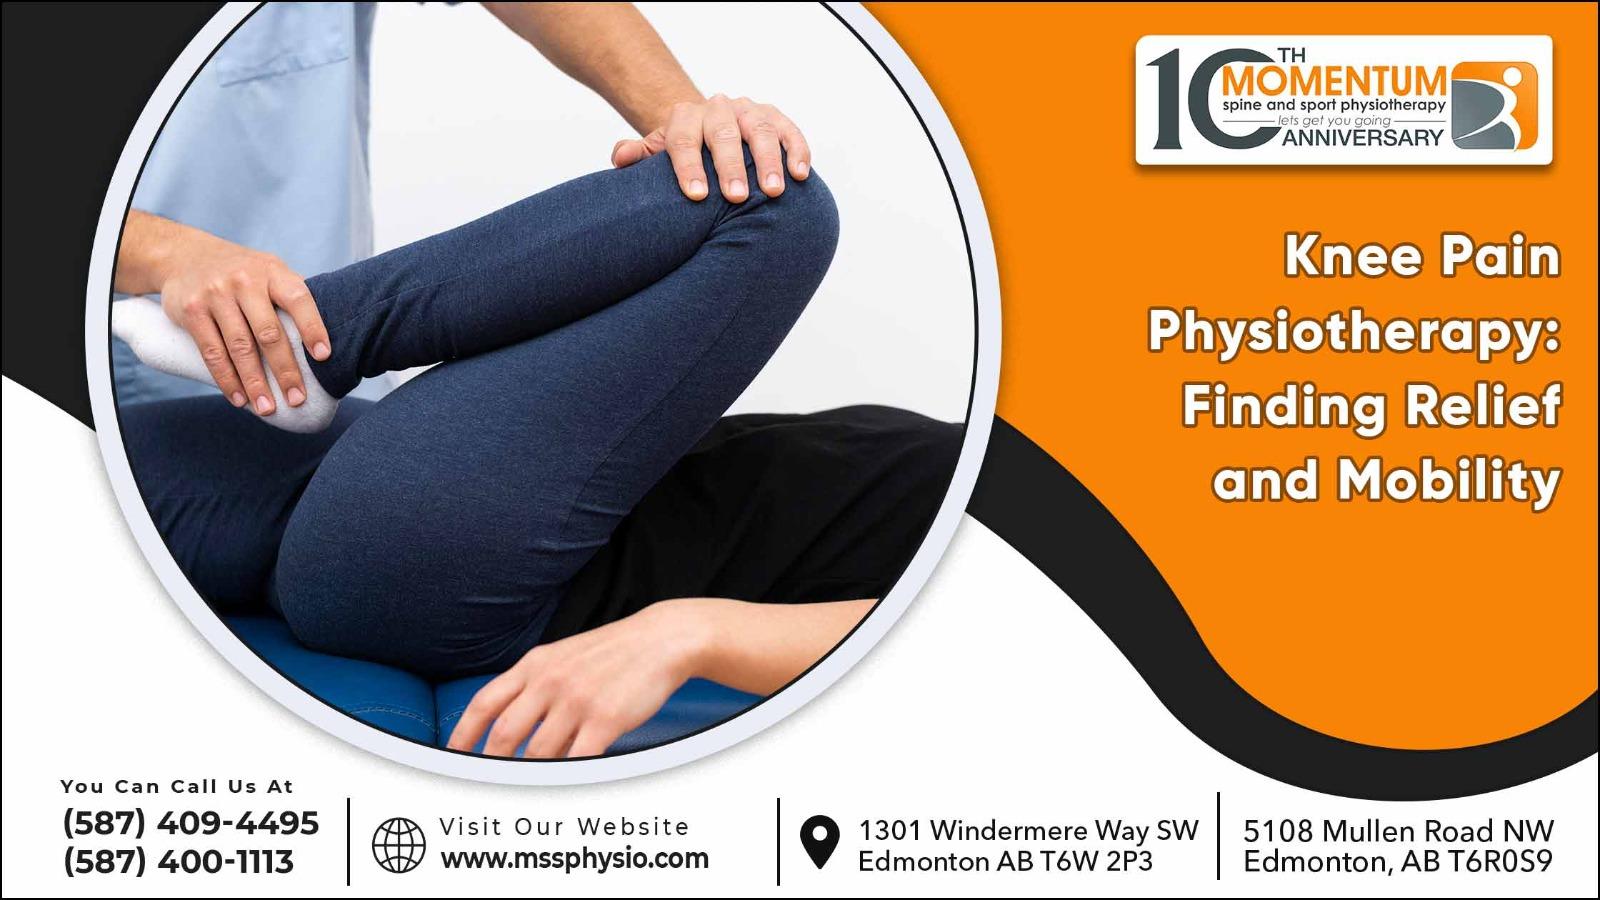 Knee Pain Physiotherapy Finding Relief and Mobility